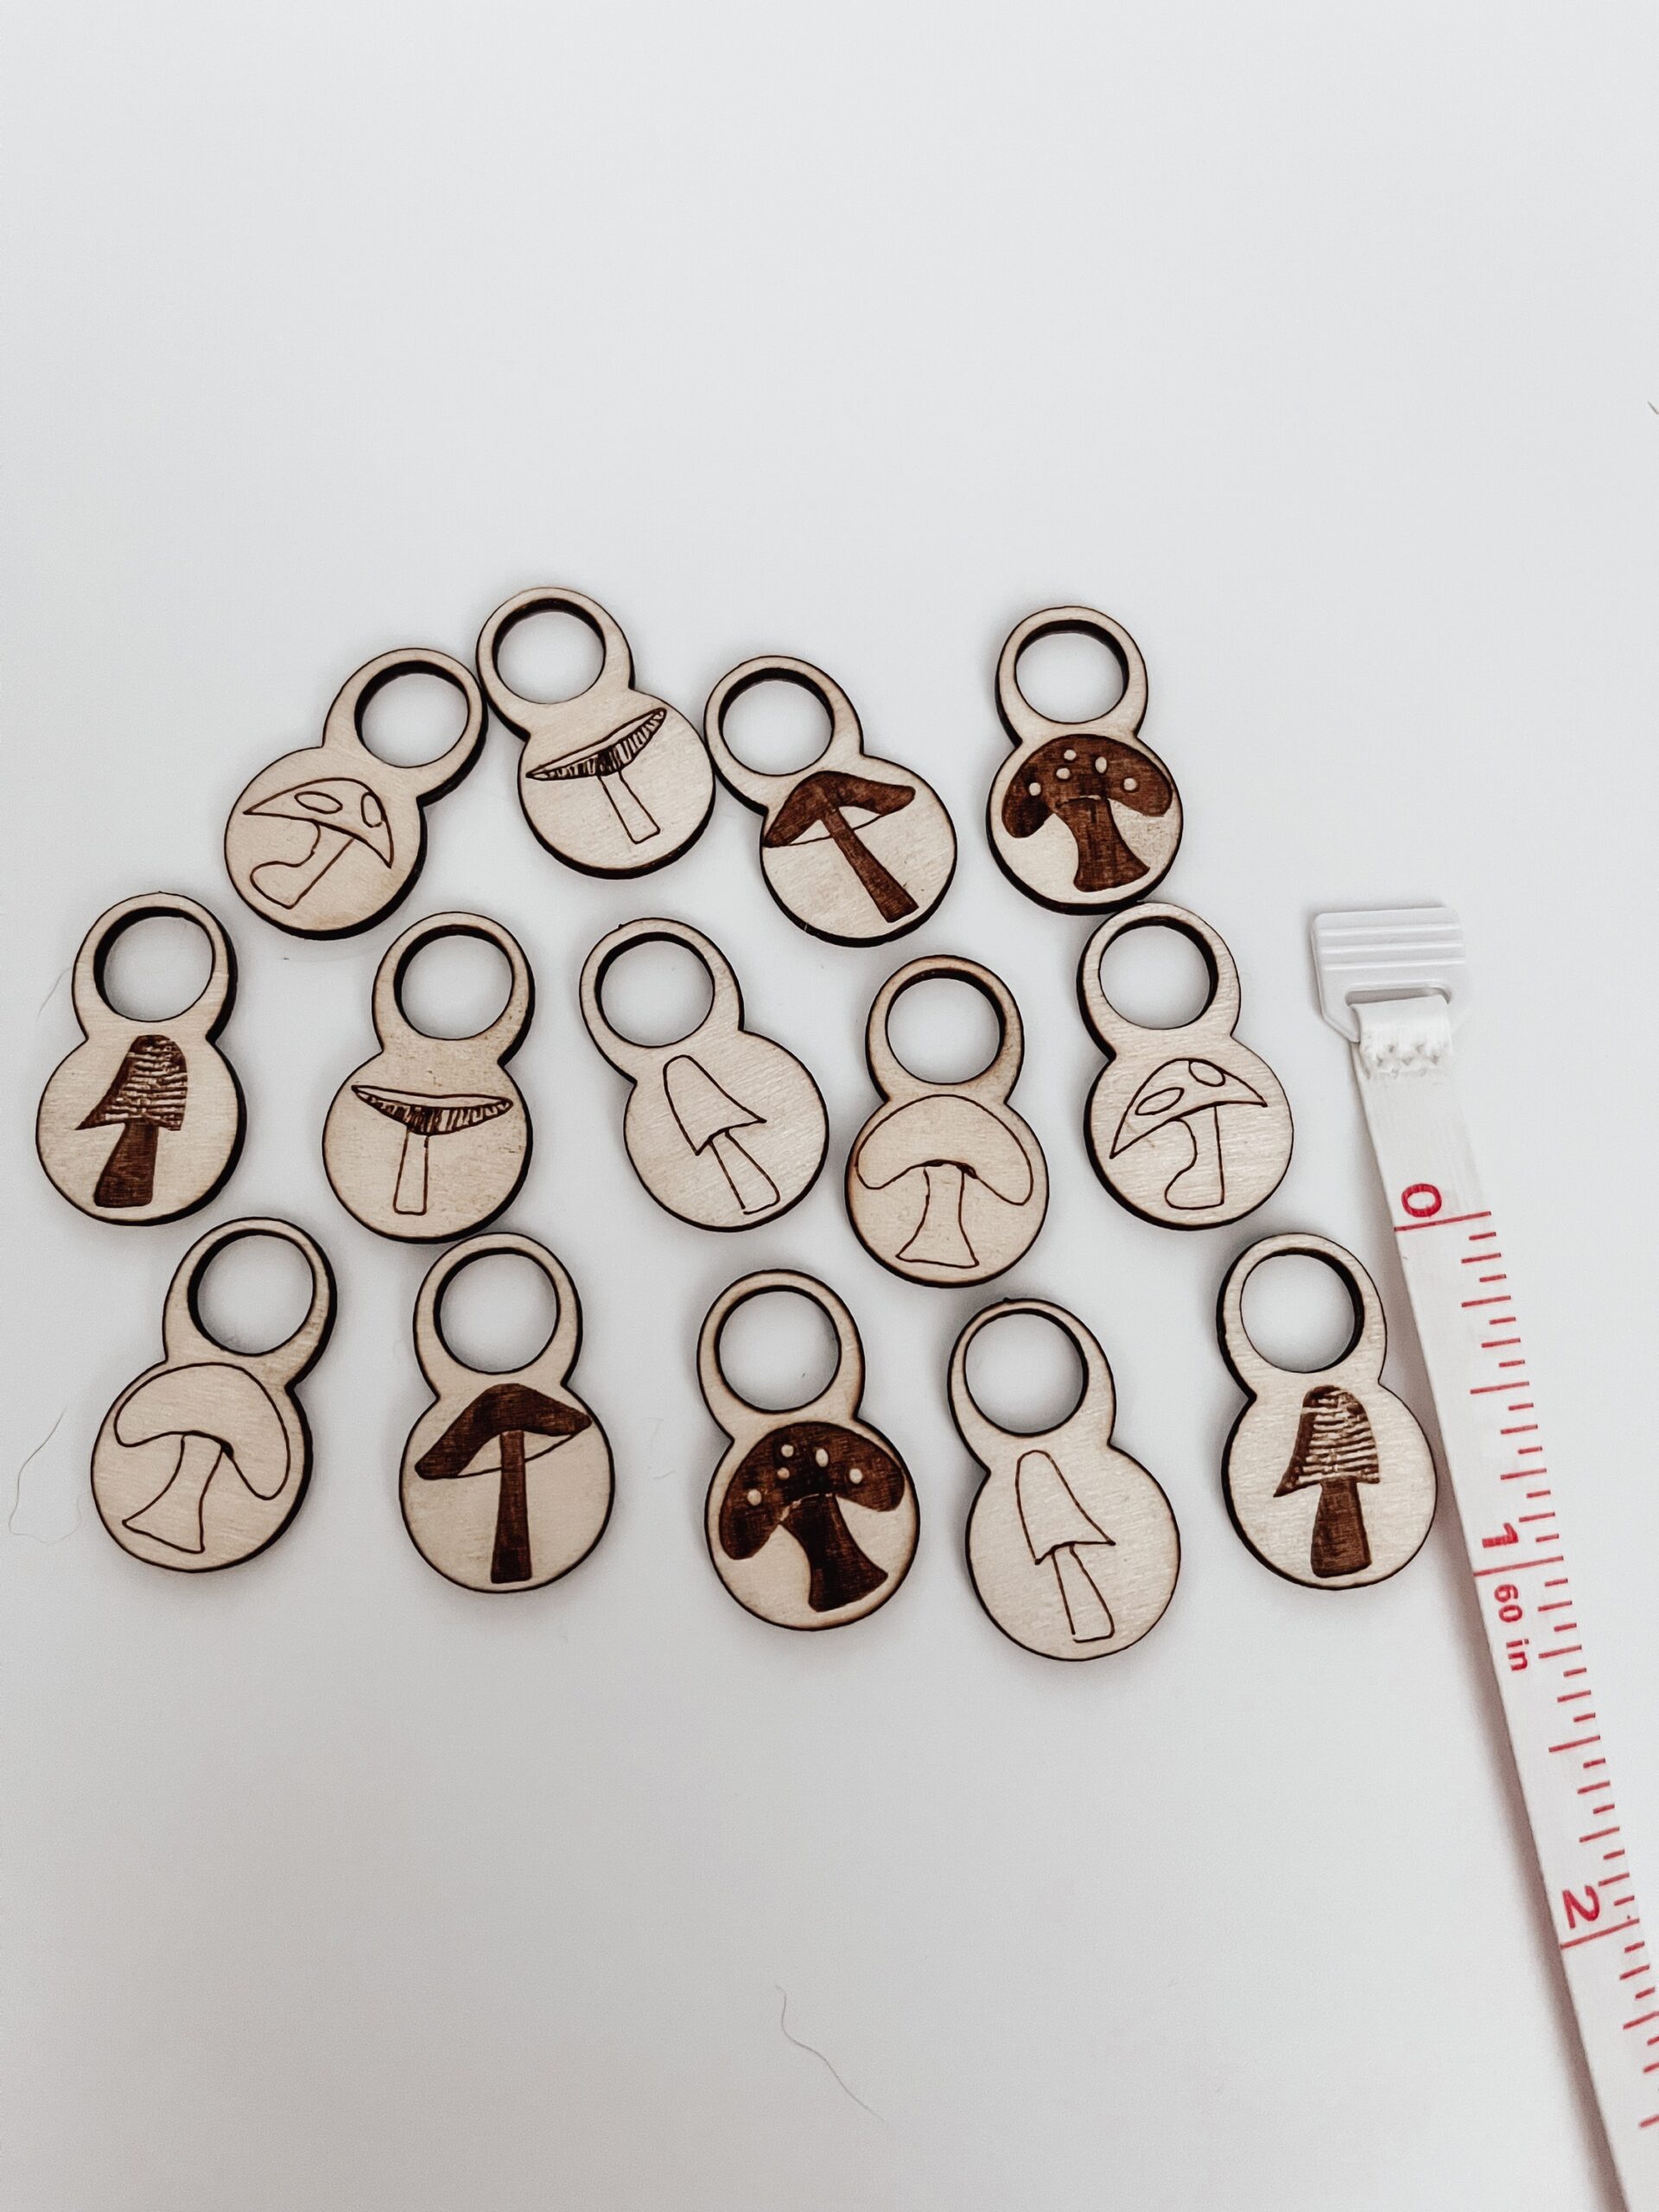 A total of 14 wood stitch markers with a variety of hand-drawn mushroom designs are displayed on a white background. next to a measuring tape showing they're approximately 1" tall.